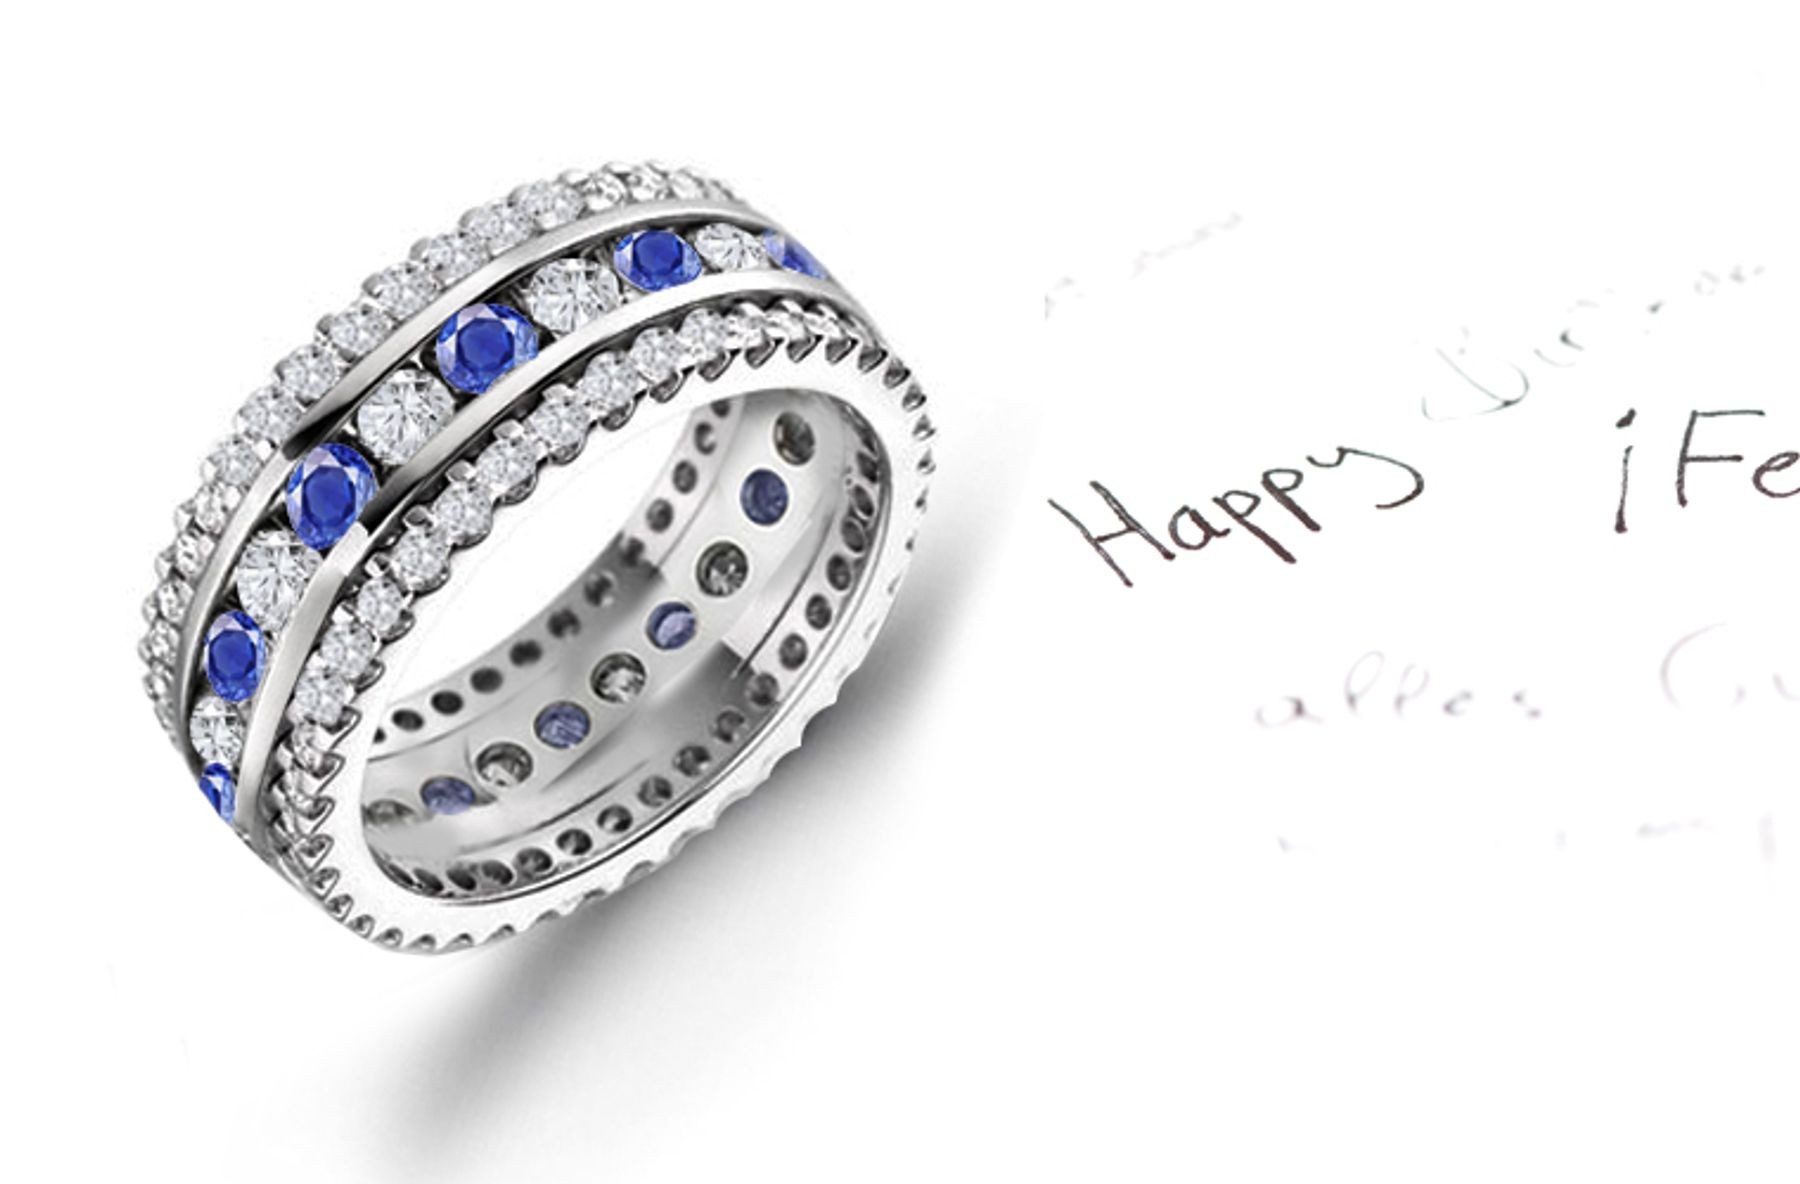 3 Prong & Channel Set Sparkling Diamond & Sapphire Ring